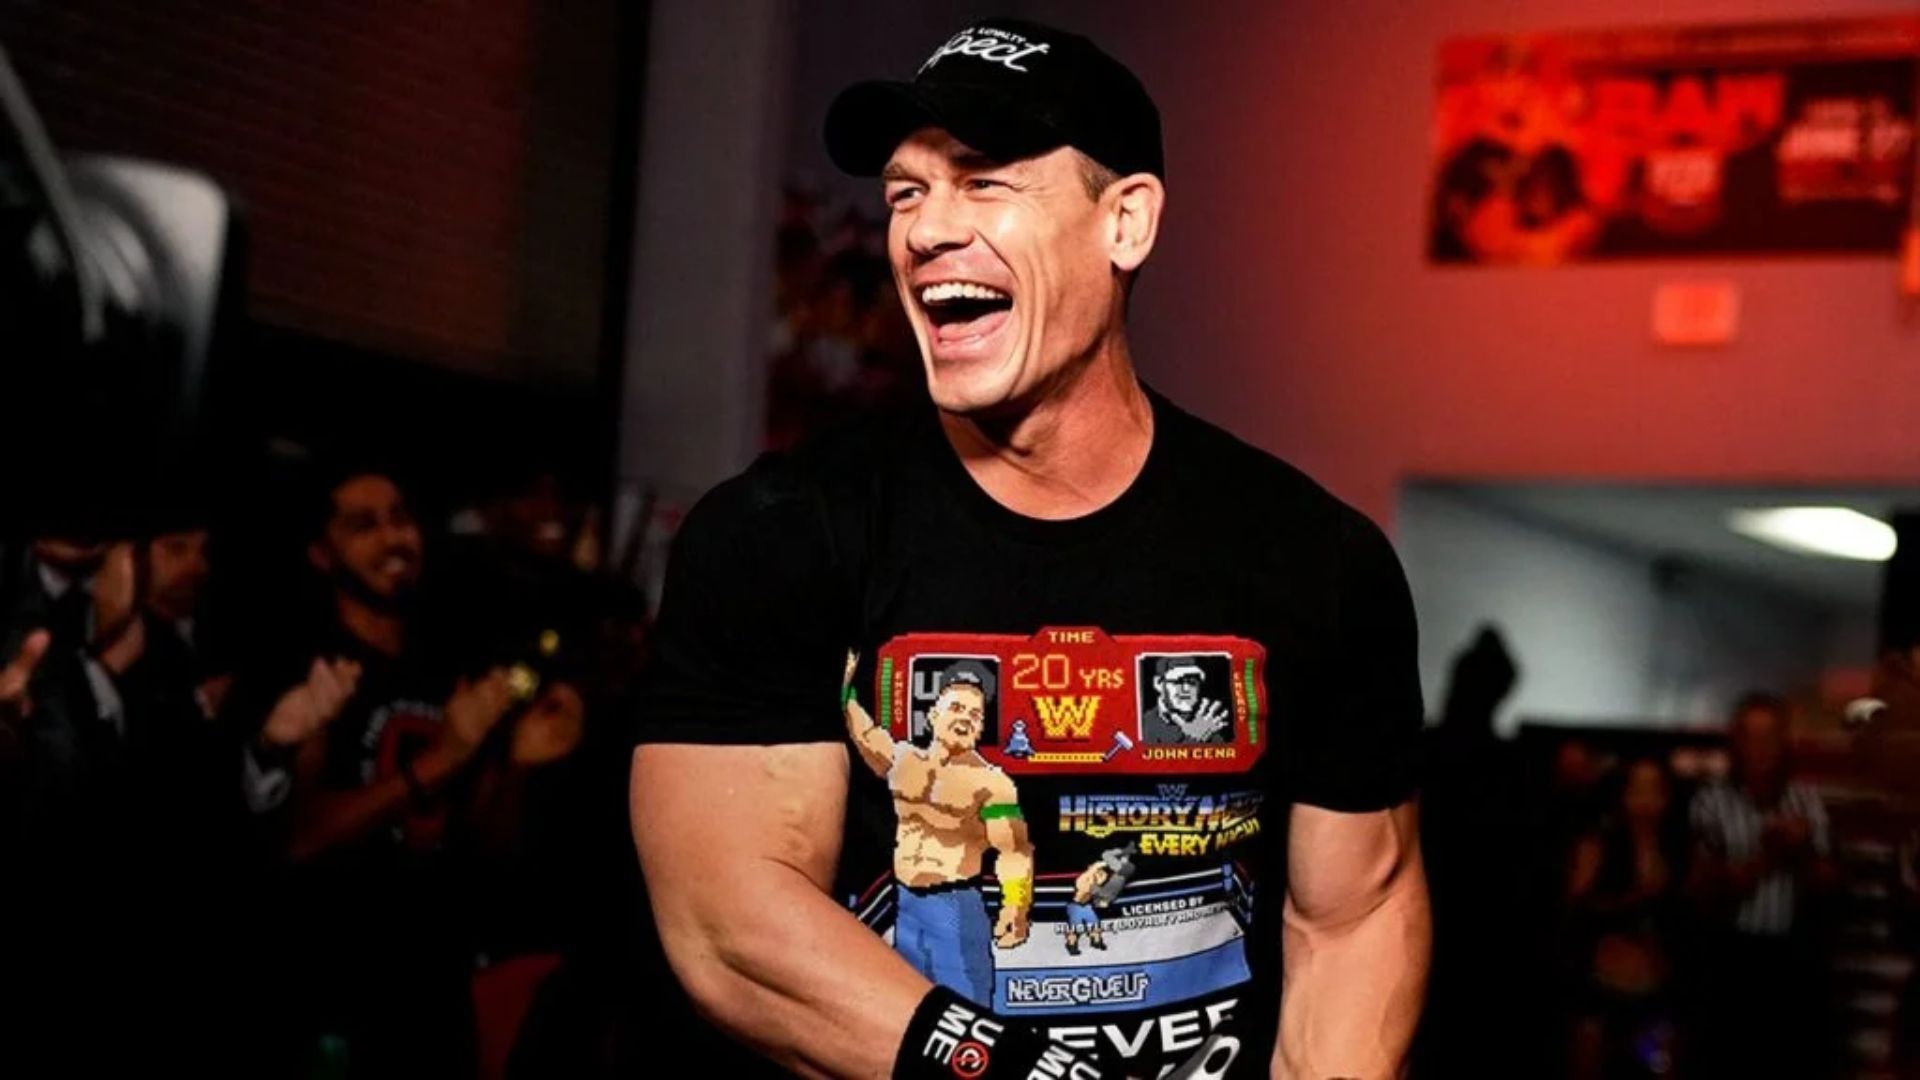 John Cena is a 16 time world champion in WWE.